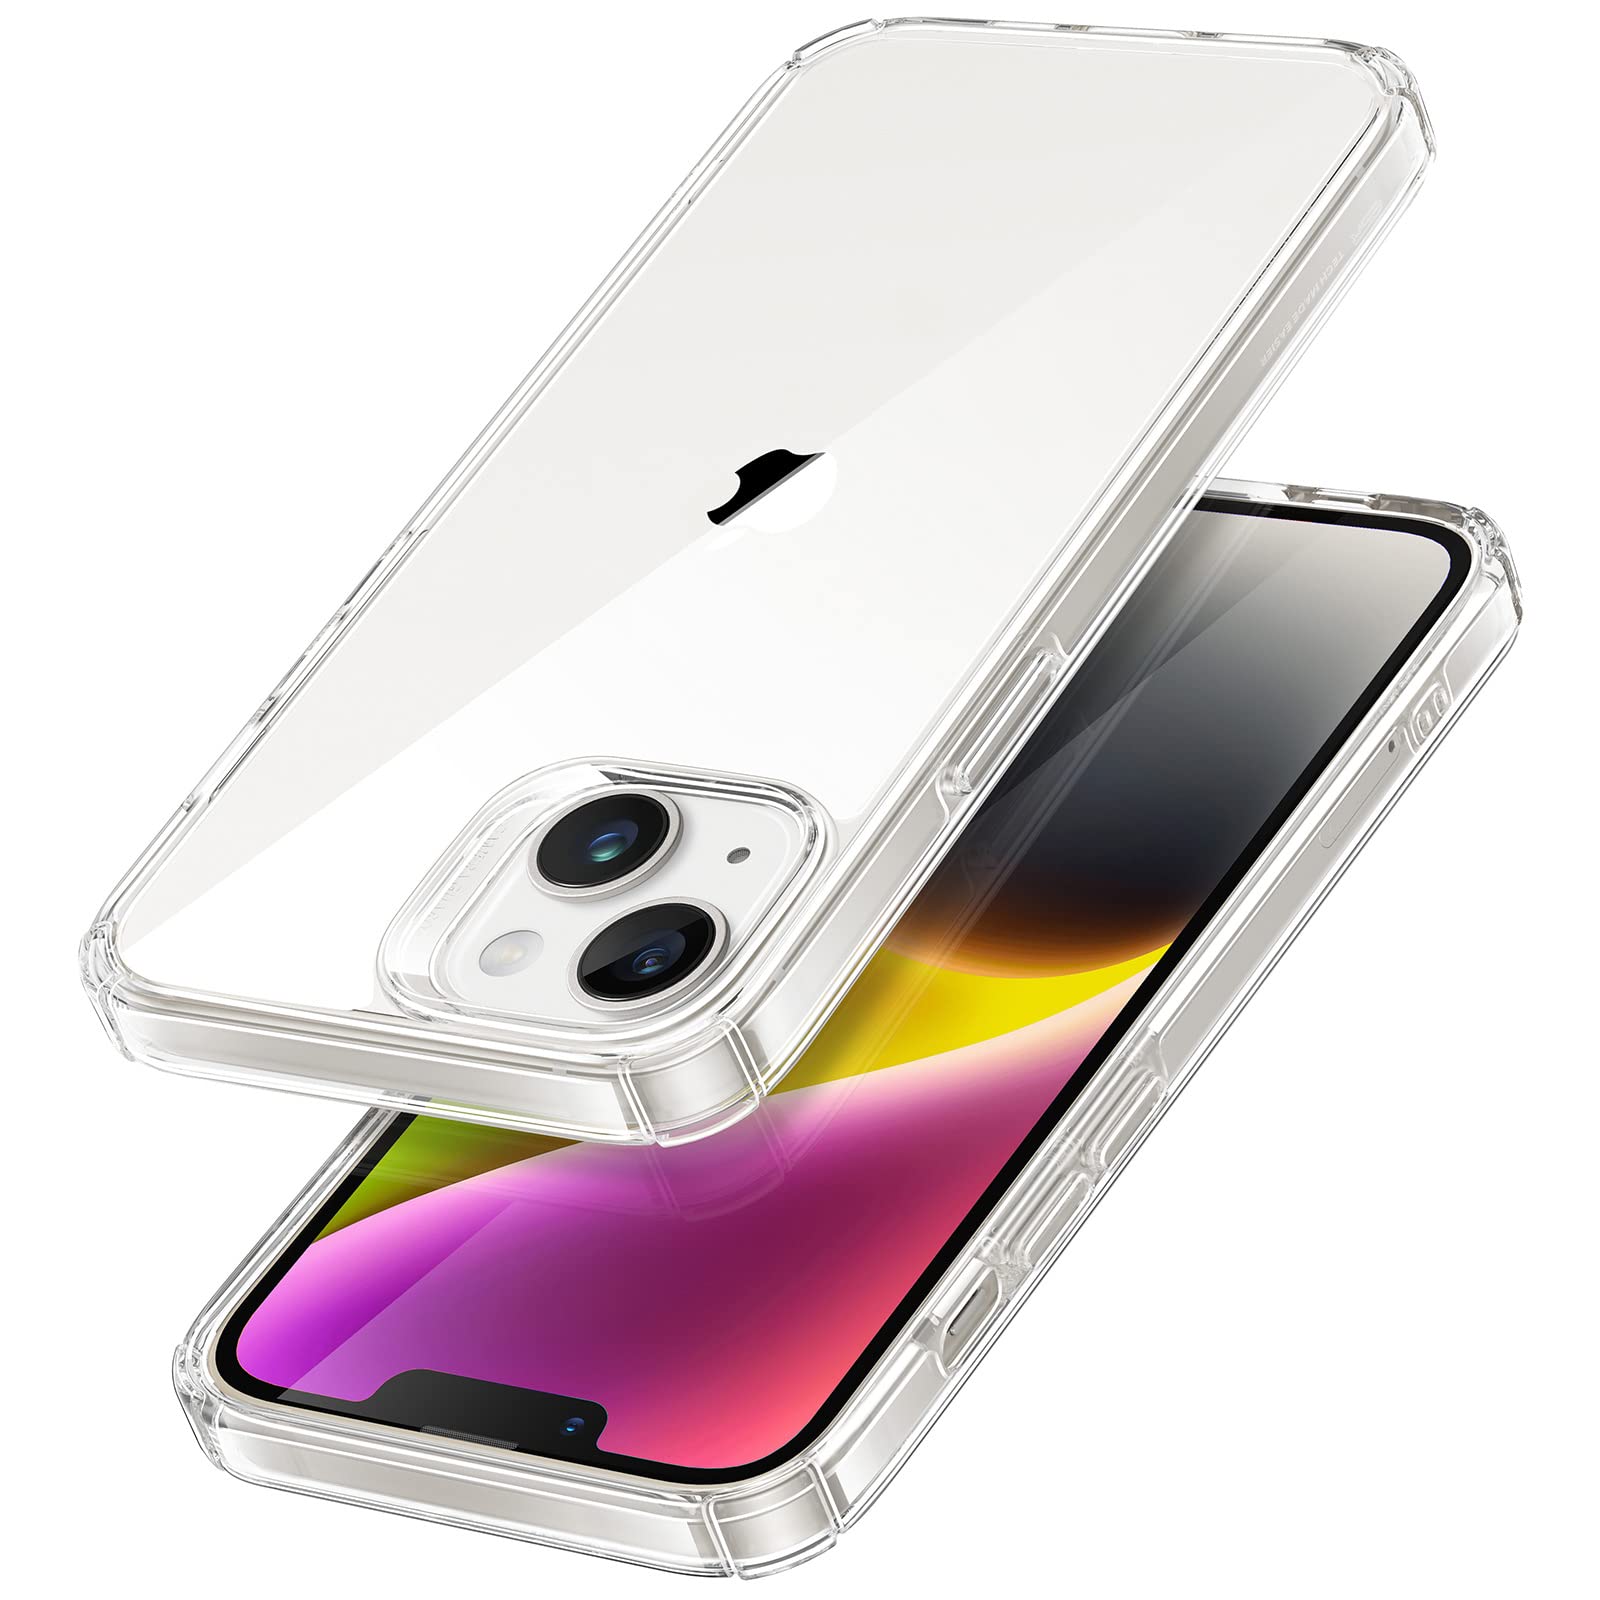 ESR Krystec Clear Case Ultra-Yellowing Resistant (Various Sizes) from $6 & More + Free Shipping w/ Prime or $25+ orders